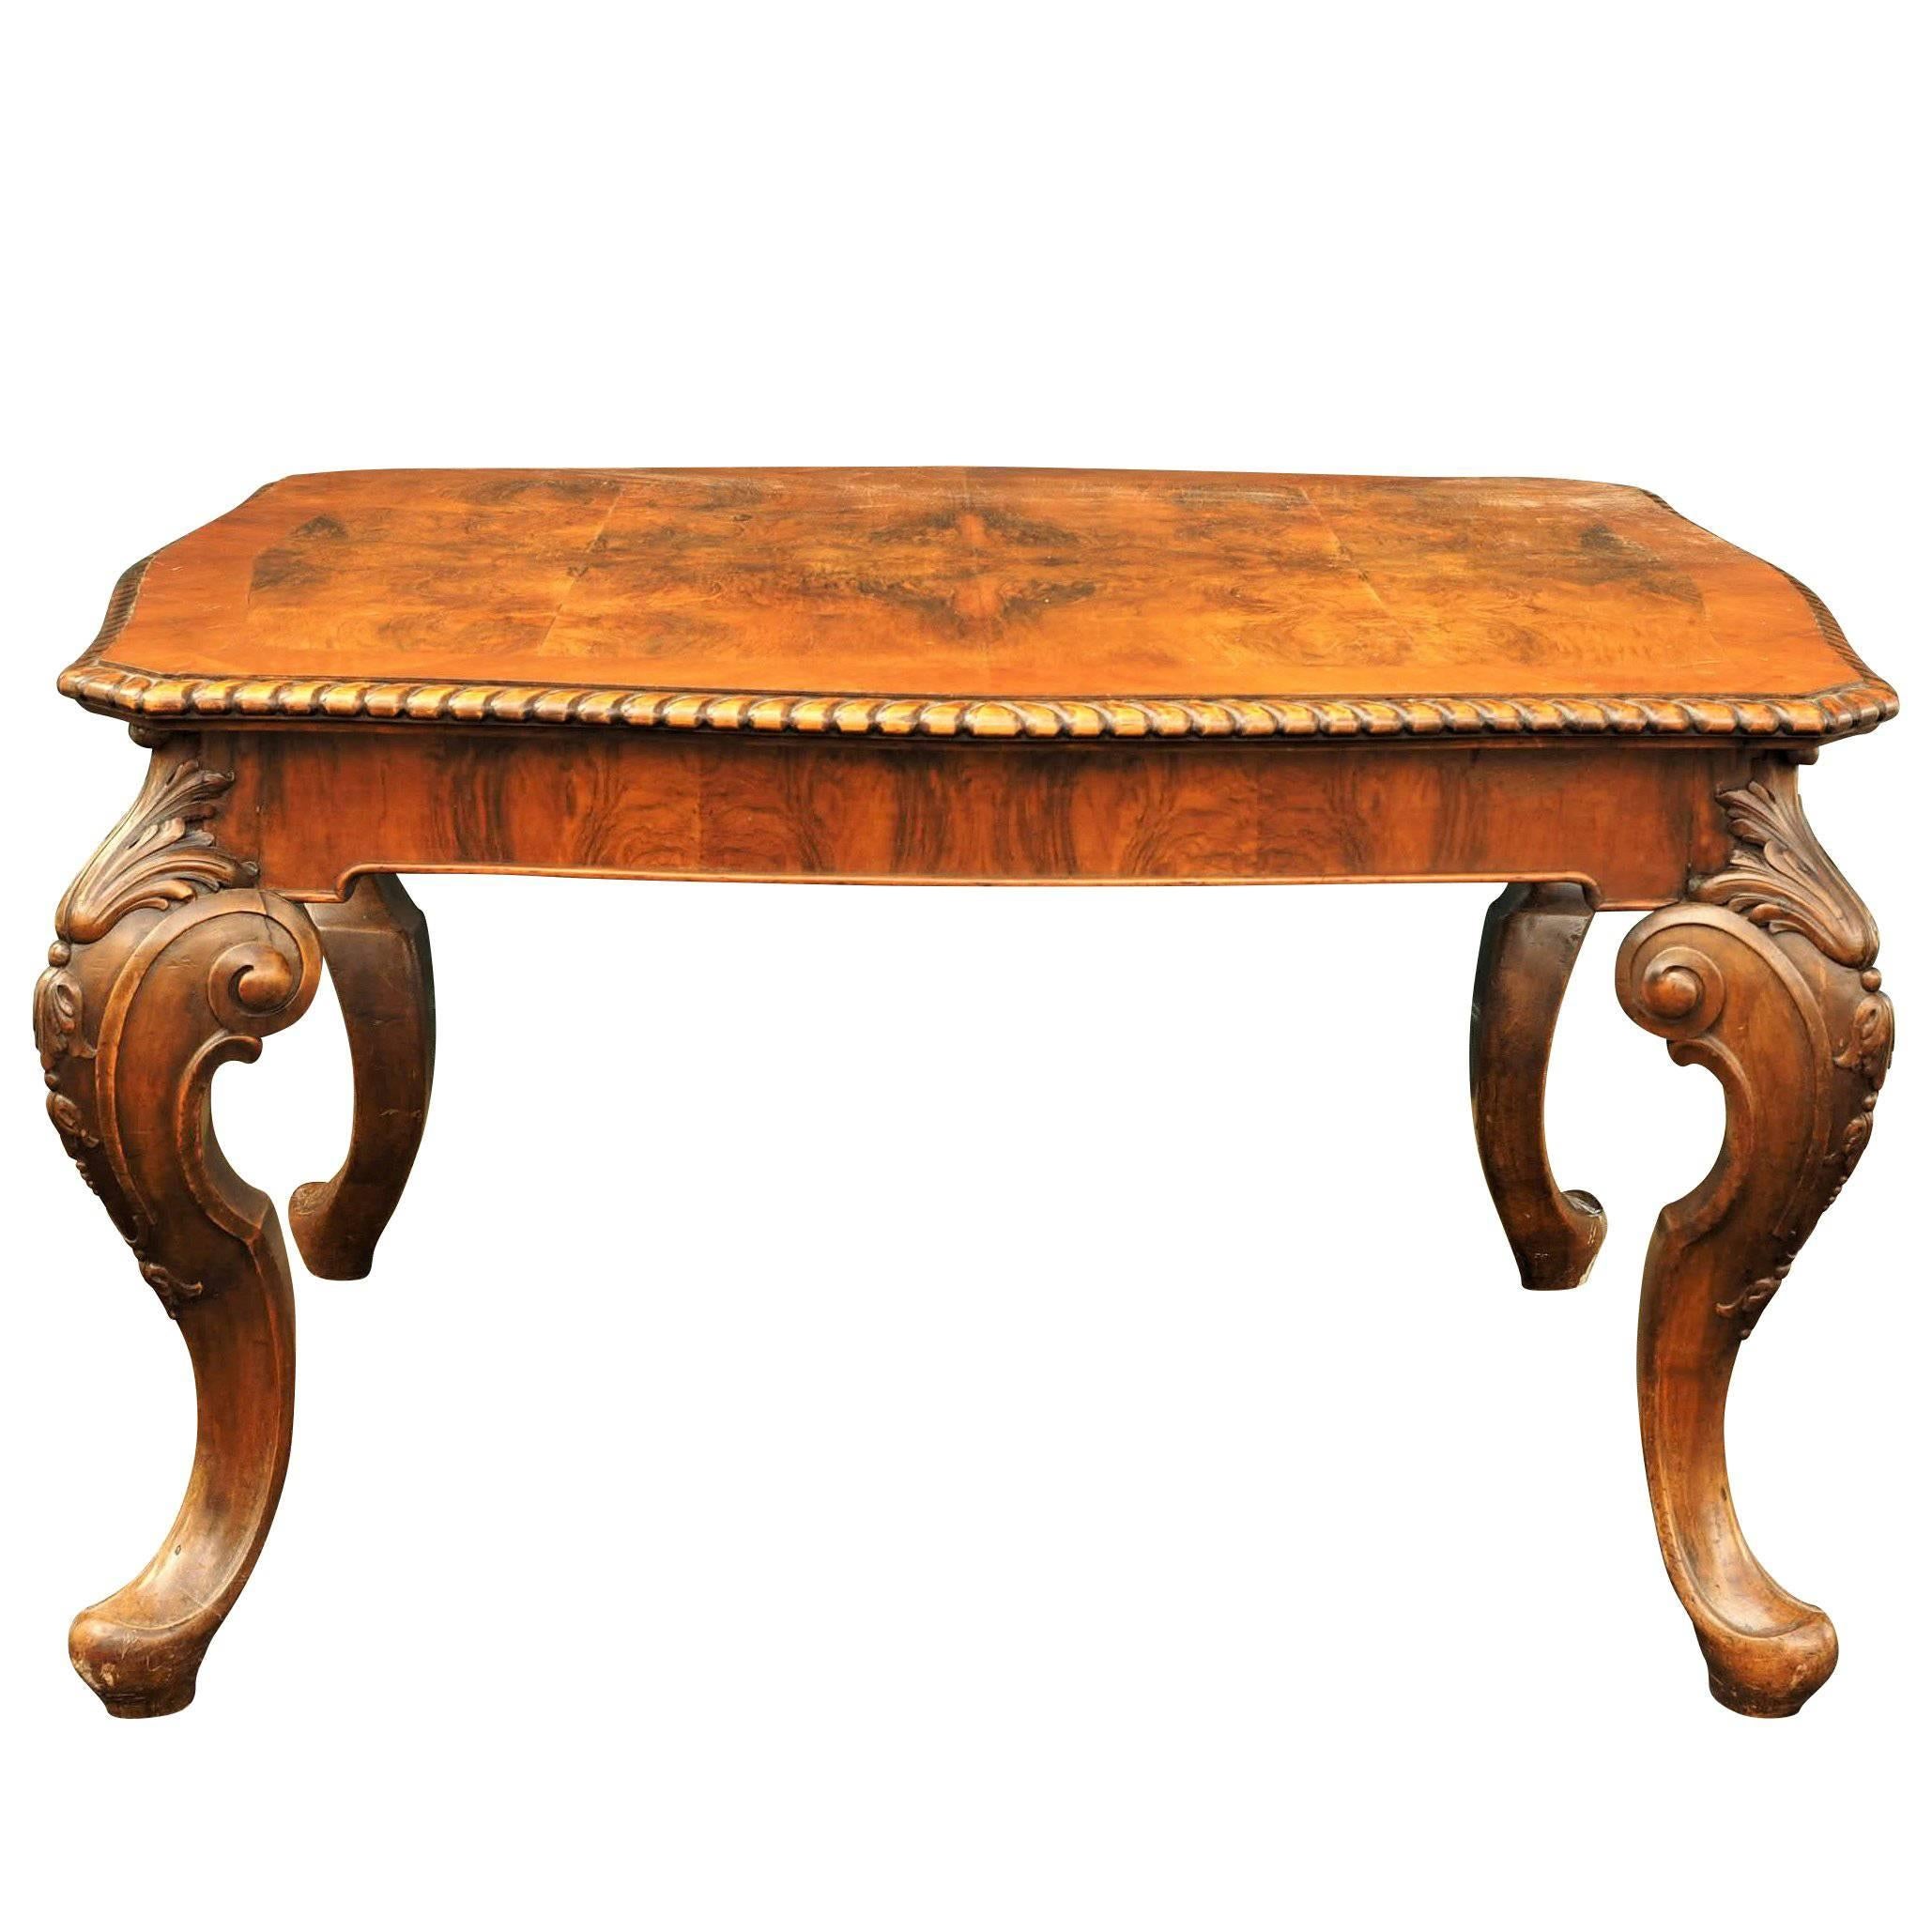 Heavily Carved Antique Table